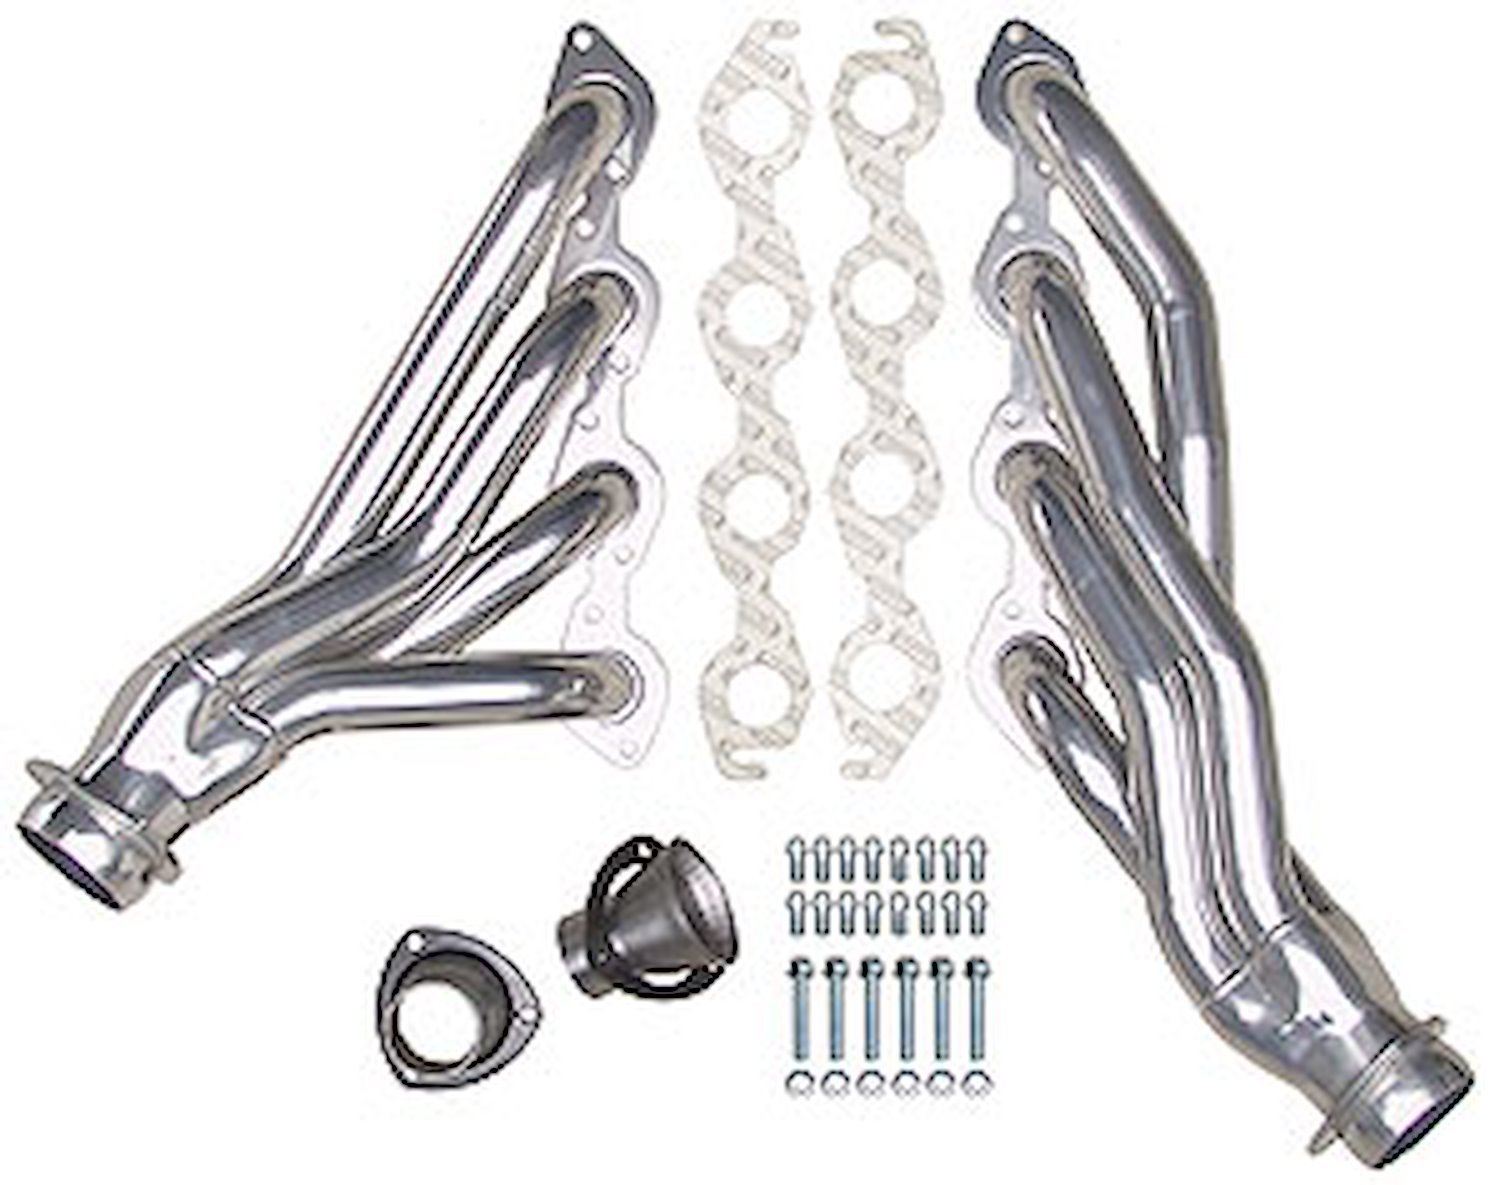 Standard Duty HTC Coated Shorty Headers 1965-81 Chevy Passenger Car 396, 402, 454, 502